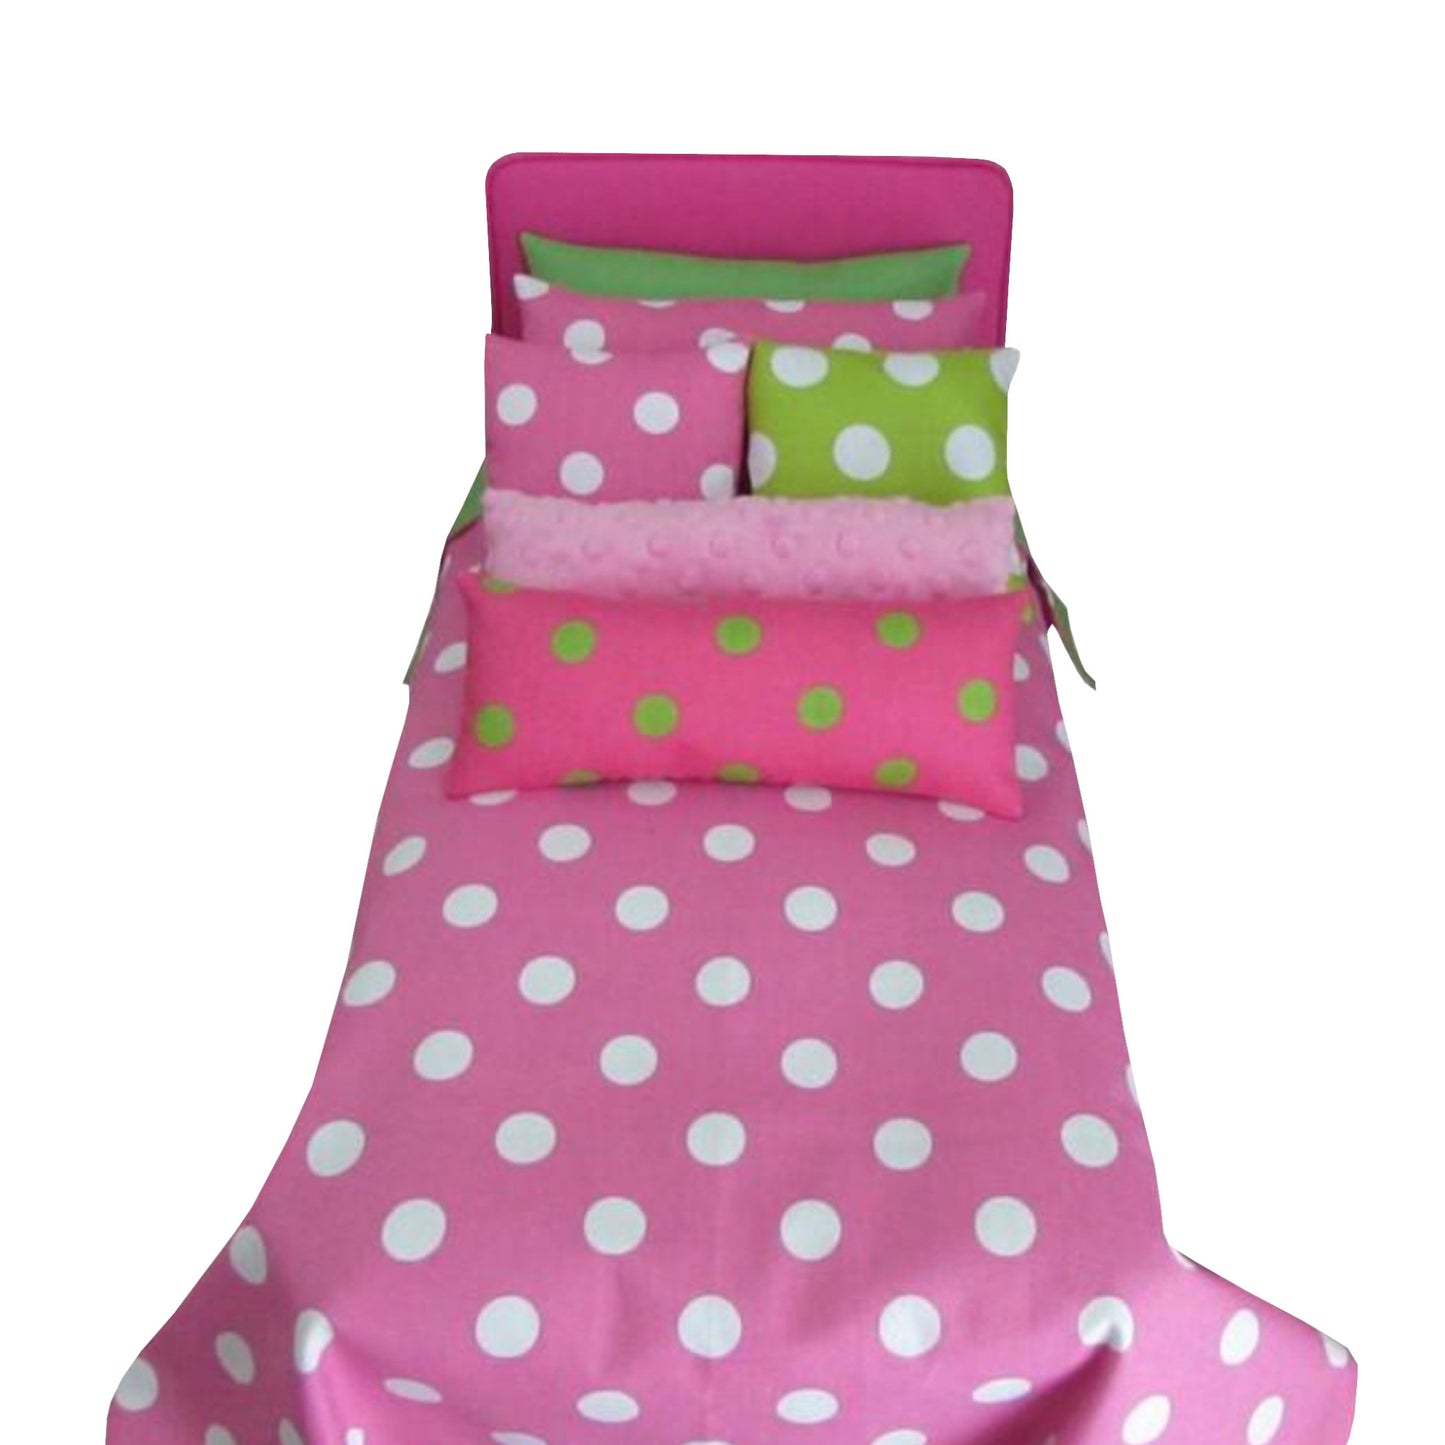 Dots Doll Bedding for 18-inch Doll Beds